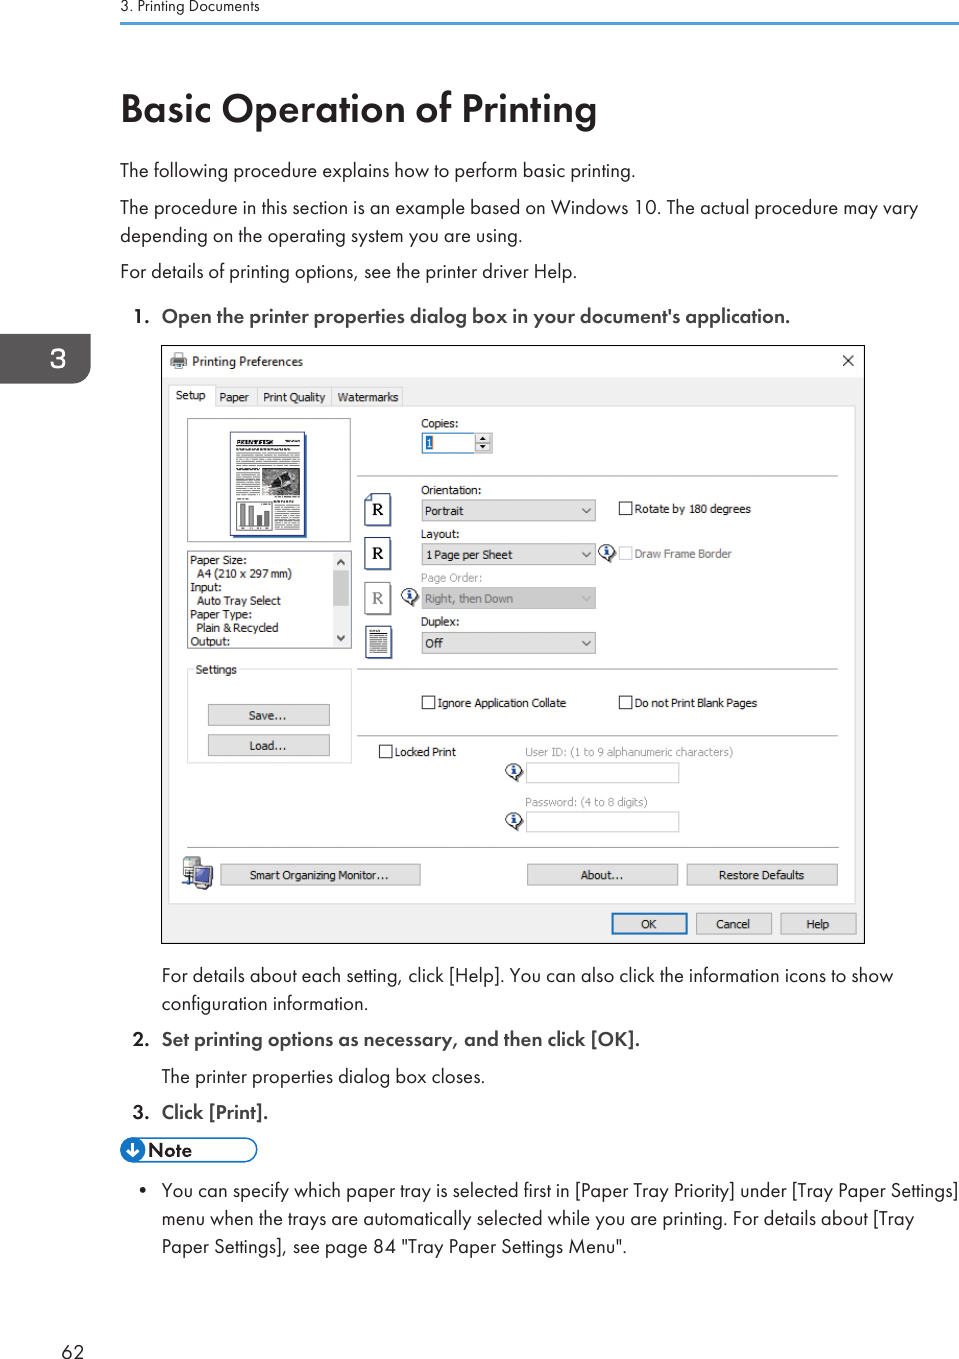 Basic Operation of PrintingThe following procedure explains how to perform basic printing.The procedure in this section is an example based on Windows 10. The actual procedure may varydepending on the operating system you are using.For details of printing options, see the printer driver Help.1. Open the printer properties dialog box in your document&apos;s application.For details about each setting, click [Help]. You can also click the information icons to showconfiguration information.2. Set printing options as necessary, and then click [OK].The printer properties dialog box closes.3. Click [Print].• You can specify which paper tray is selected first in [Paper Tray Priority] under [Tray Paper Settings]menu when the trays are automatically selected while you are printing. For details about [TrayPaper Settings], see page 84 &quot;Tray Paper Settings Menu&quot;.3. Printing Documents62